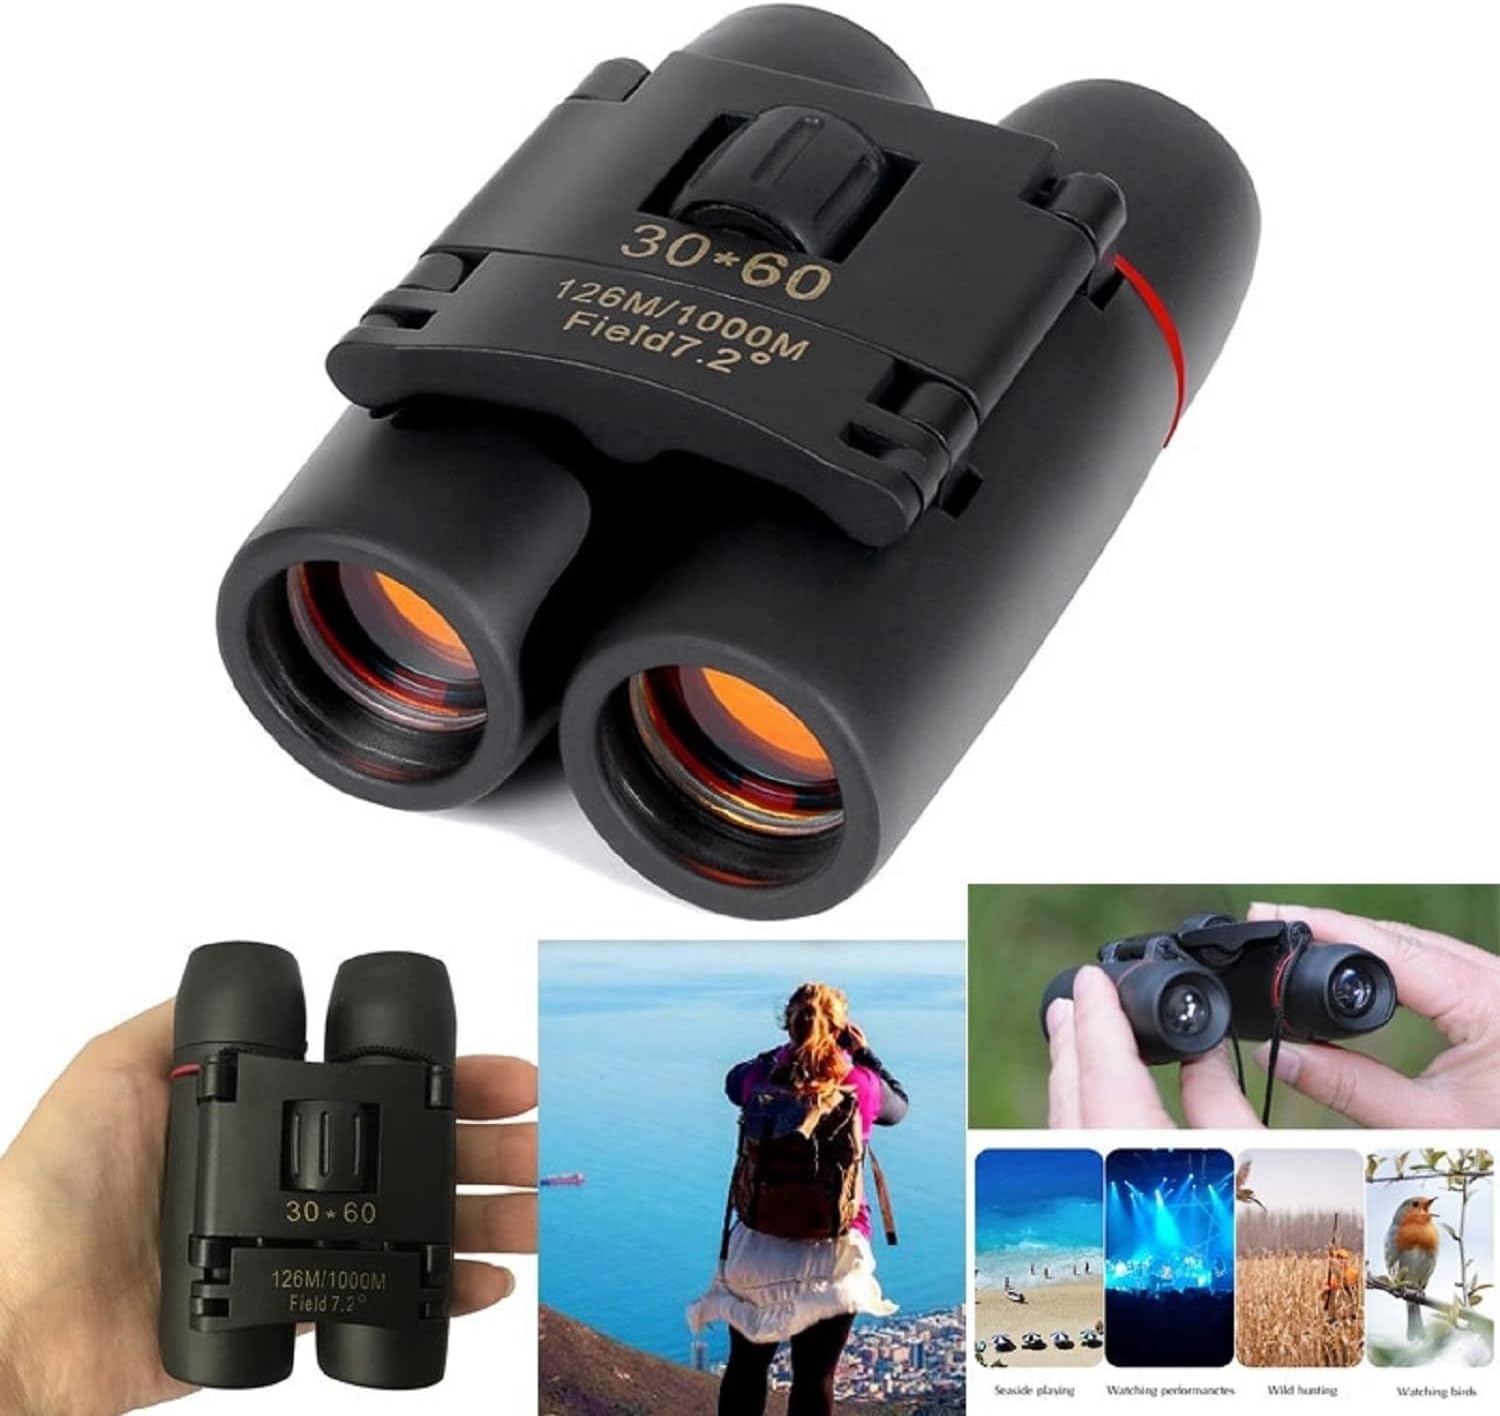 Portable Mini Binoculars,30x60 Zoom Wide View Angle Folding Binoculars Telescope with Low Light Night Vision for Outdoor Bird Watching Camping Hiking Traveling